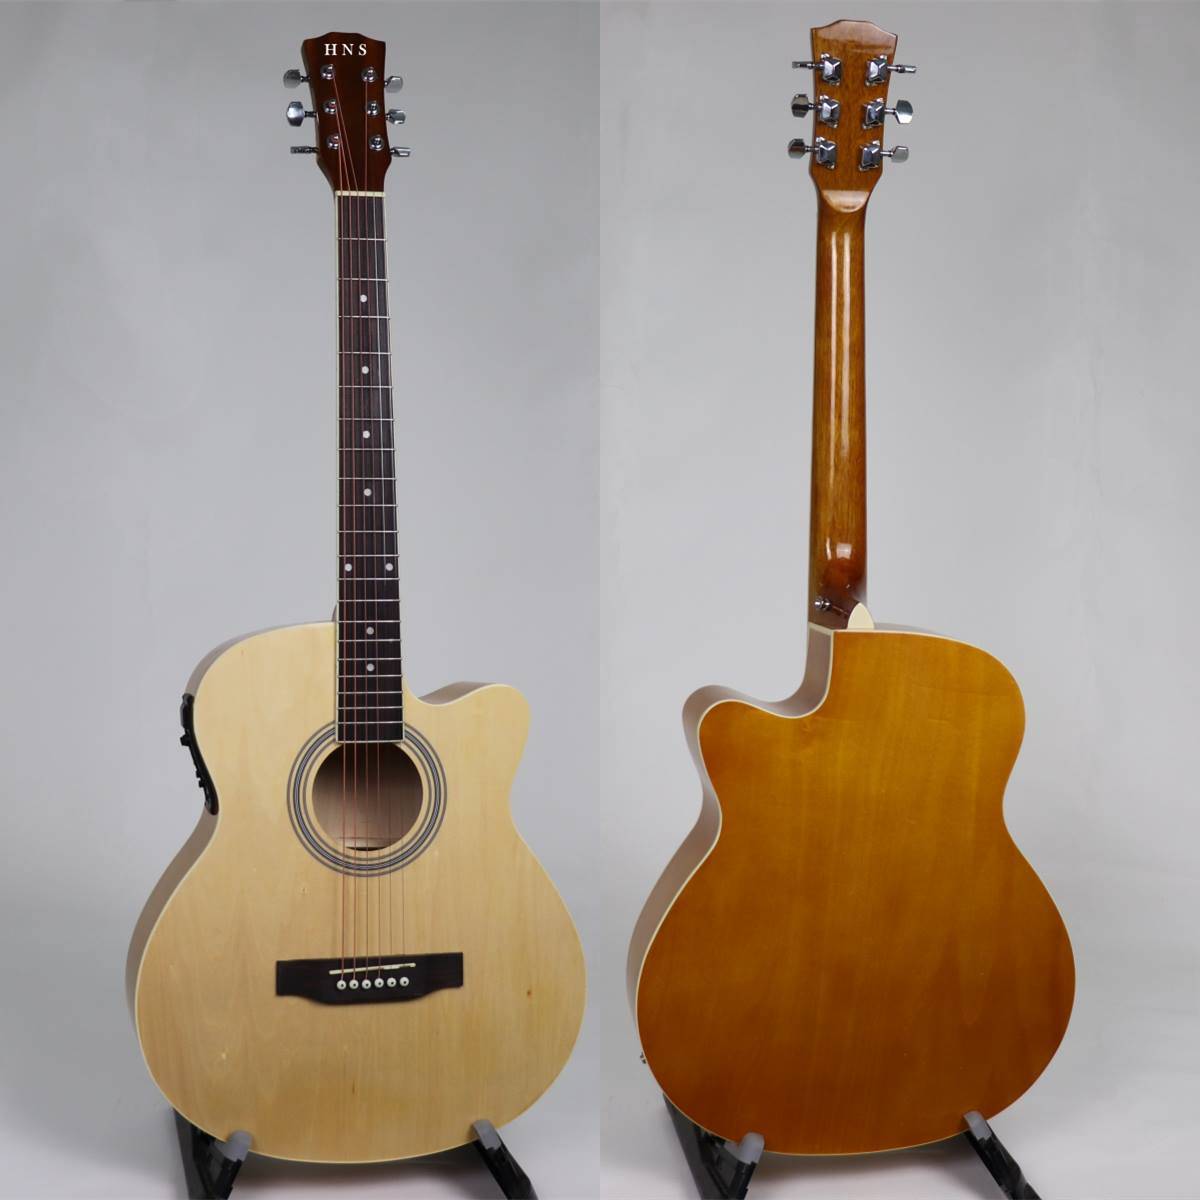 40 inch basswood gloss finish electric acoustic guitar